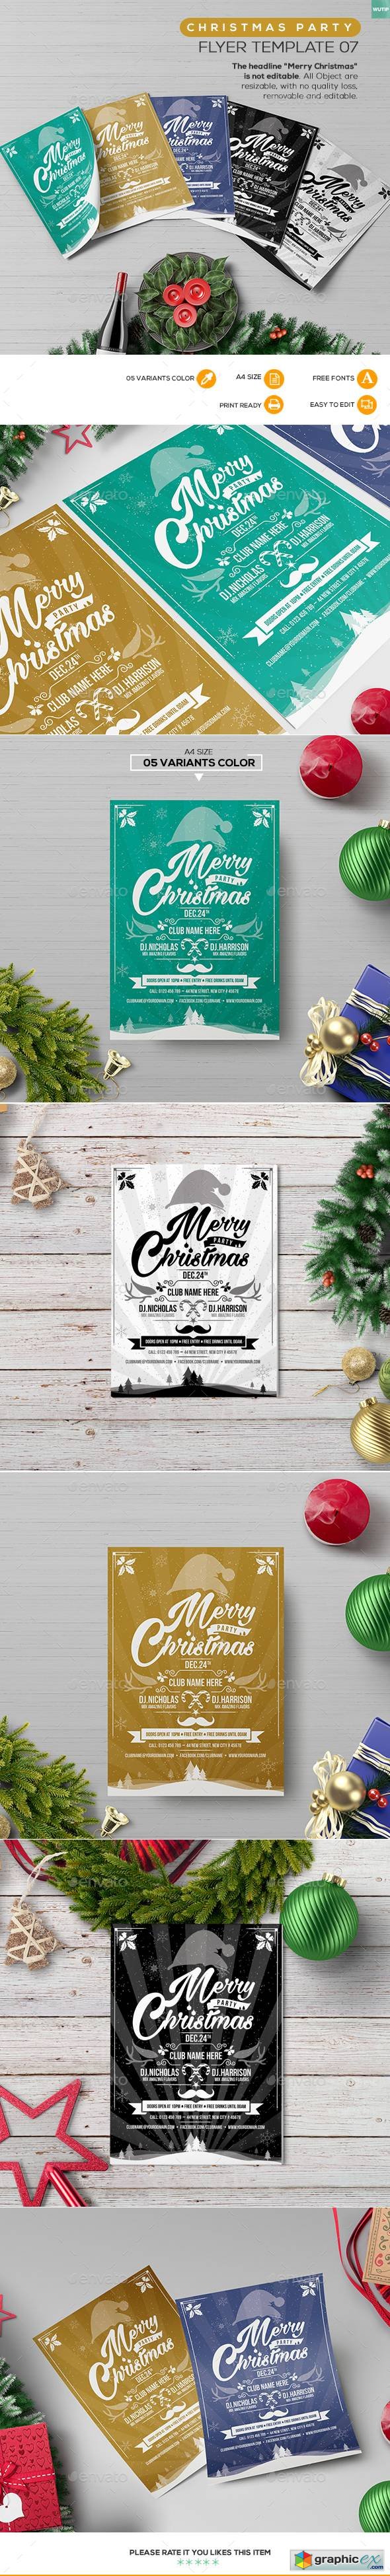 Christmas Party - Flyer Template 07